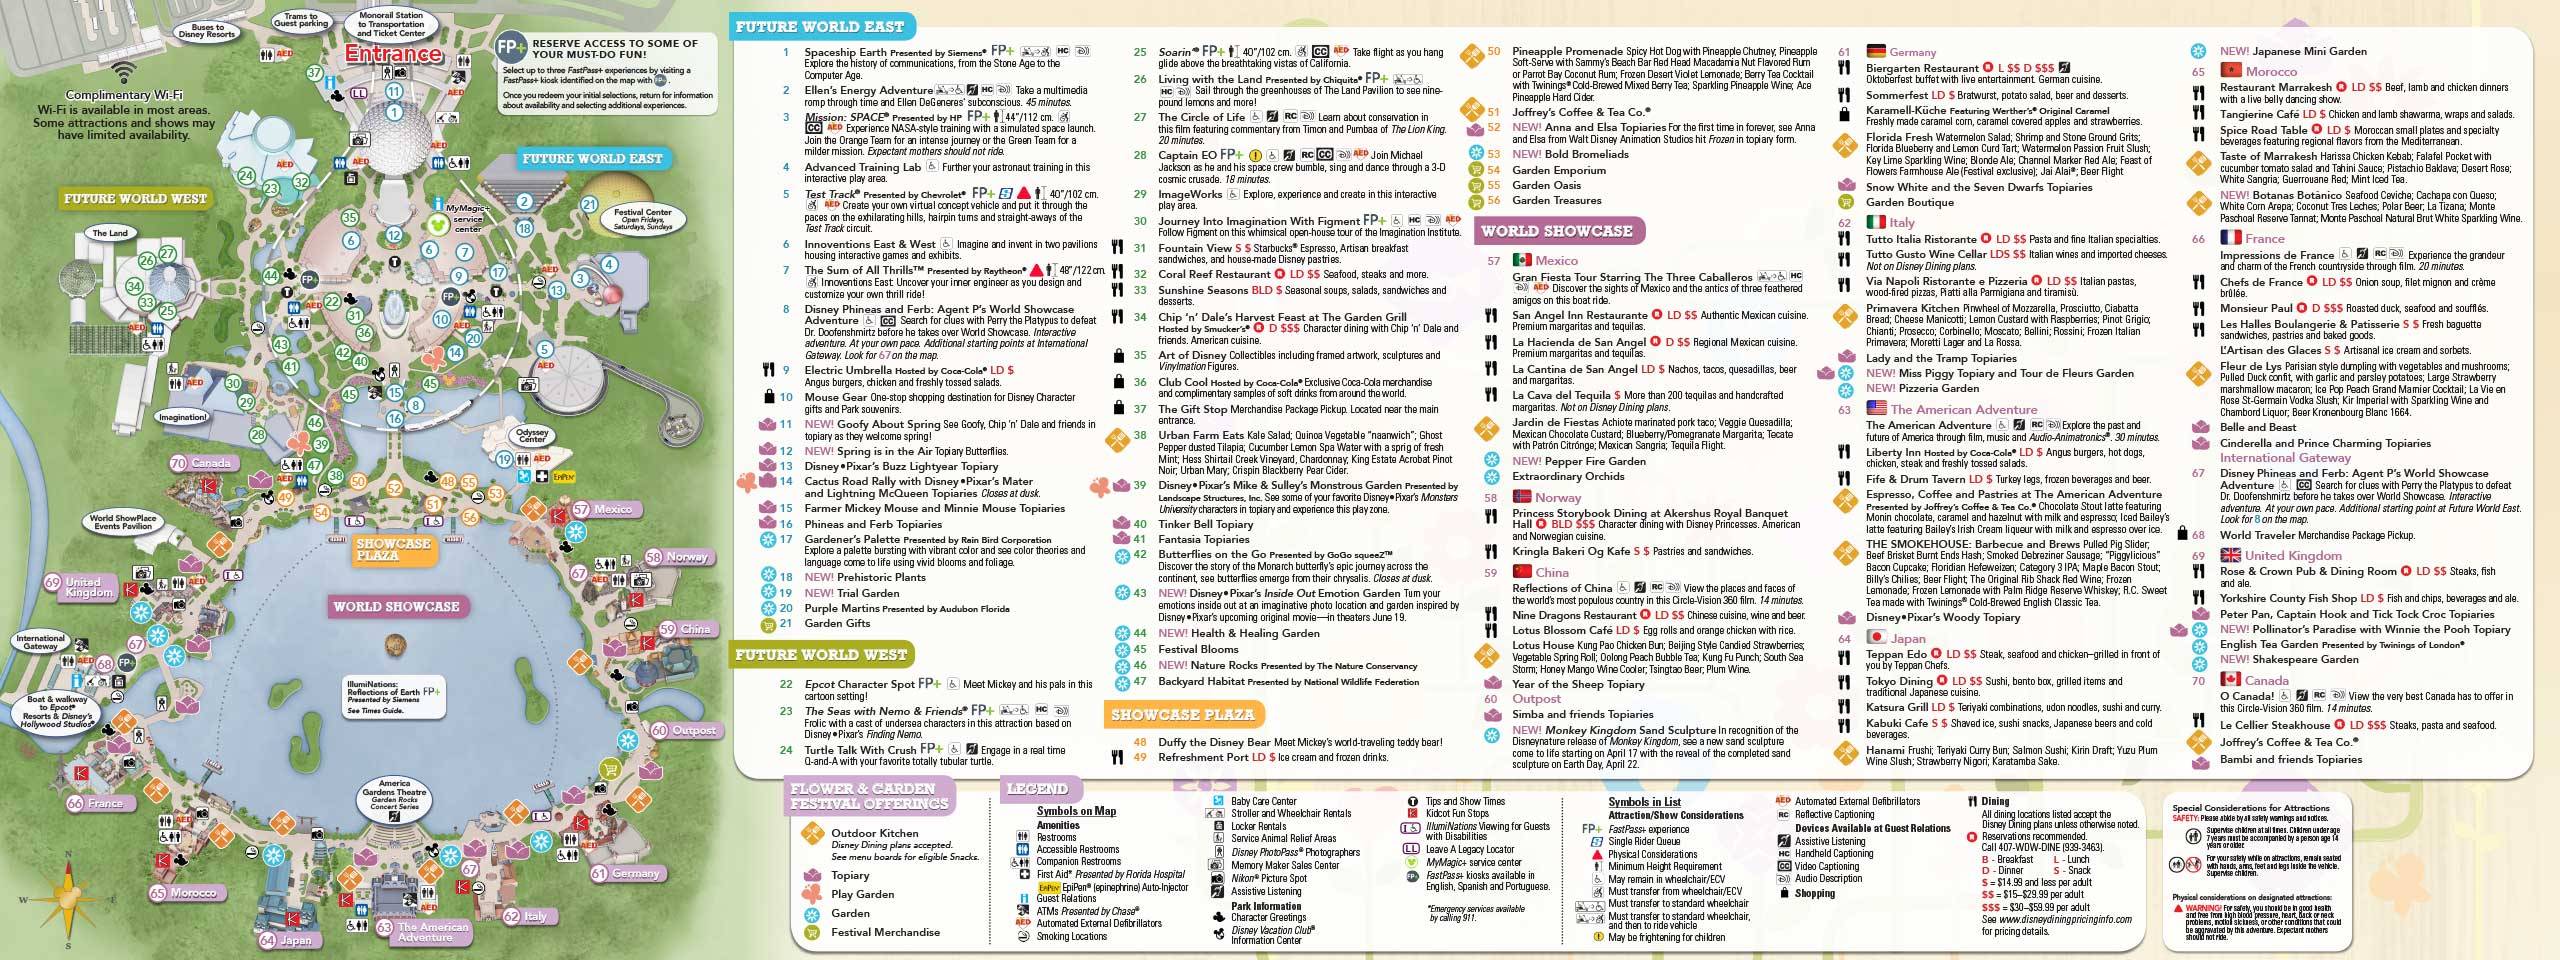 2015 Epcot Flower and Garden Festival guide map - Back